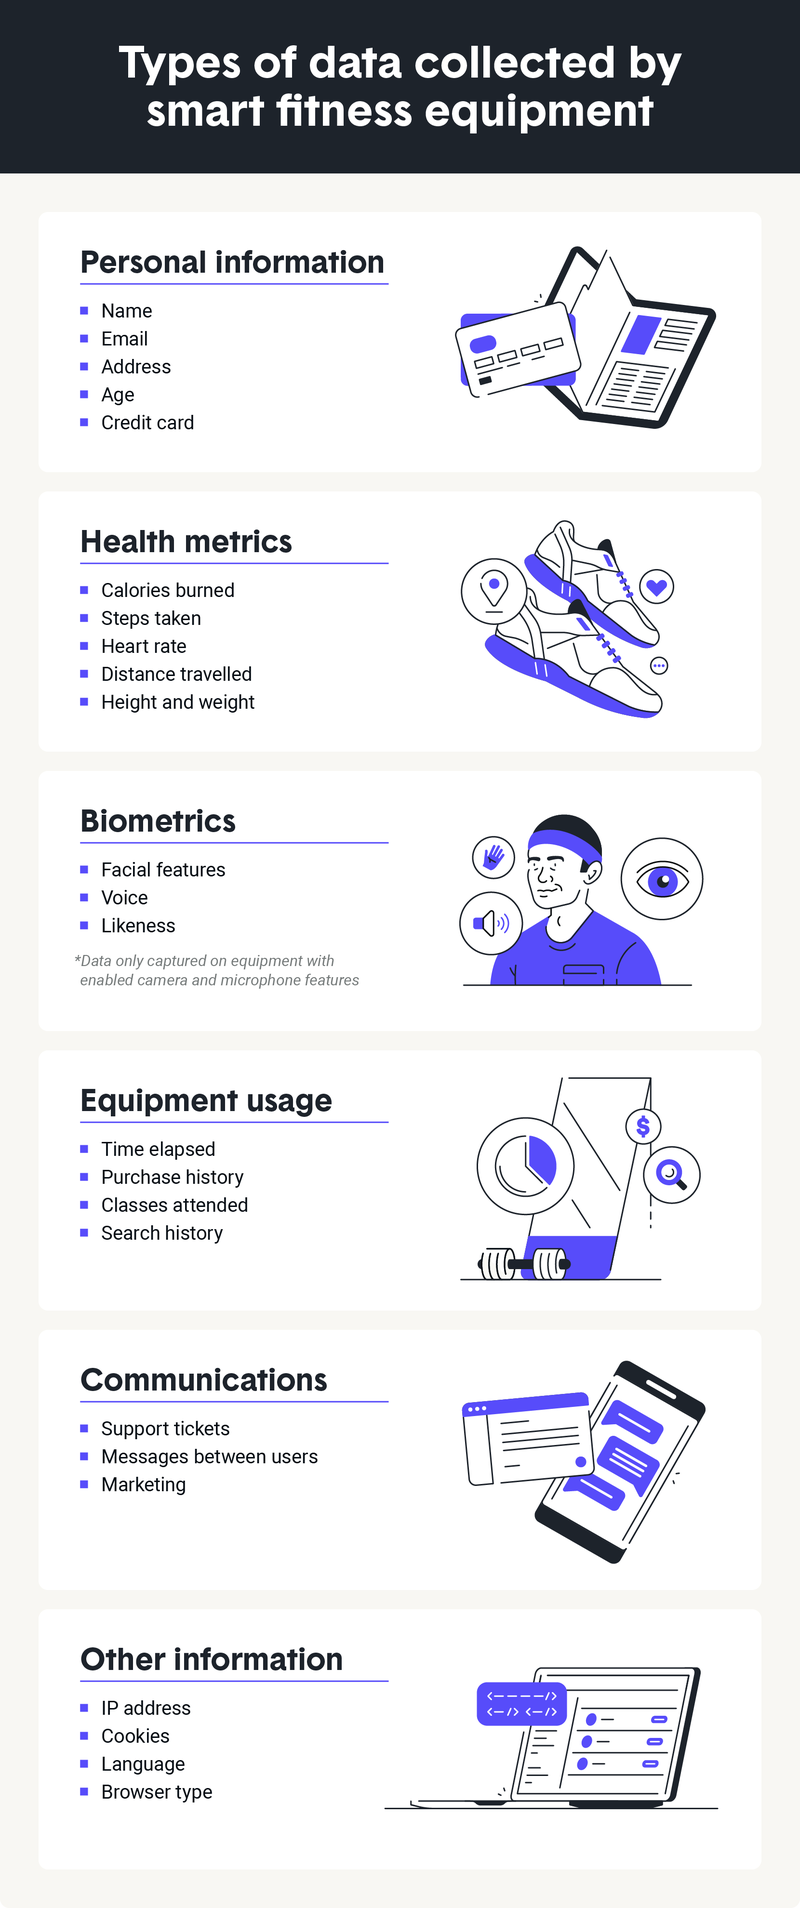 types-of-data-collected-by-smart-fitness-equipment.png